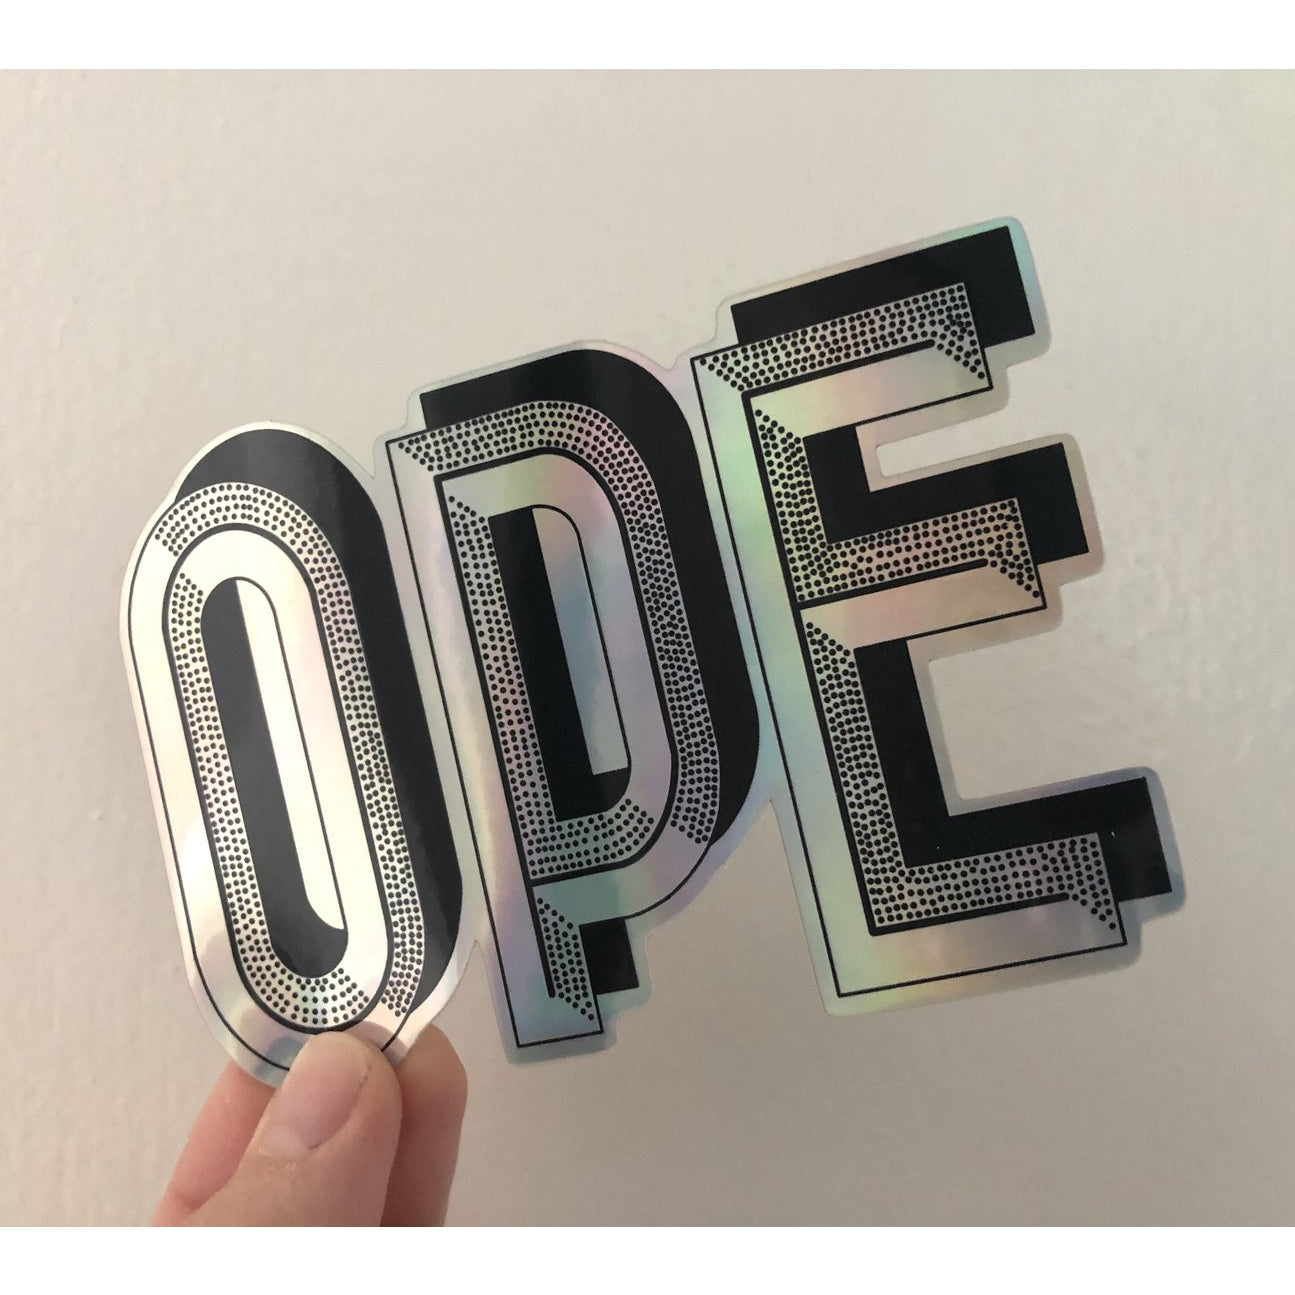 Ope Holographic Sticker - Storm and Sky Shoppe